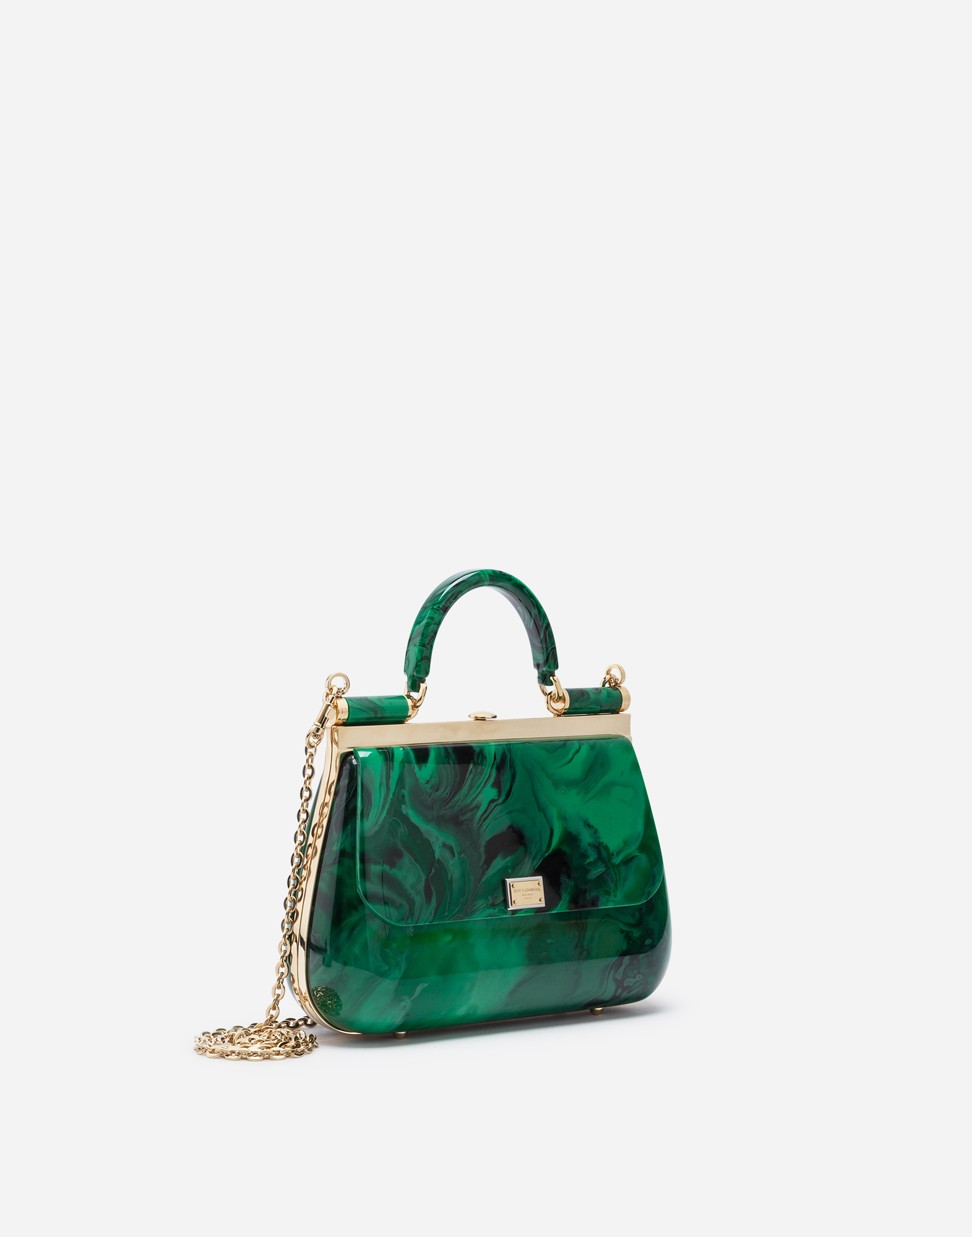 Dolce & Gabbana’s mini Sicily bag is reimagined in eye-catching green marbled-acrylic.